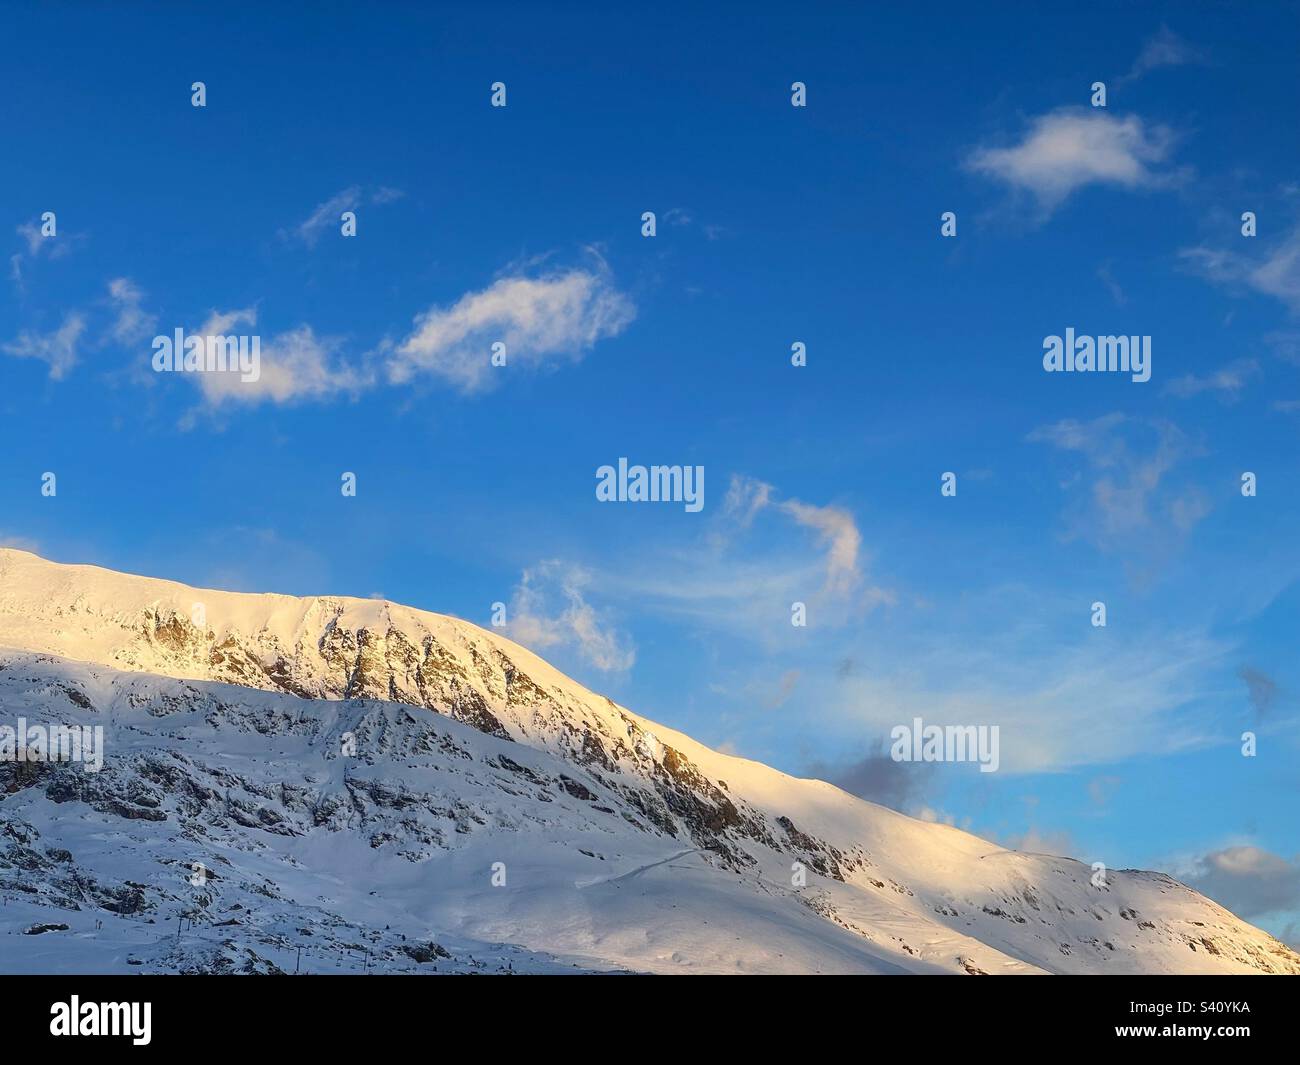 Wispy clouds in a blue sky over the snowy French Alps. Stock Photo